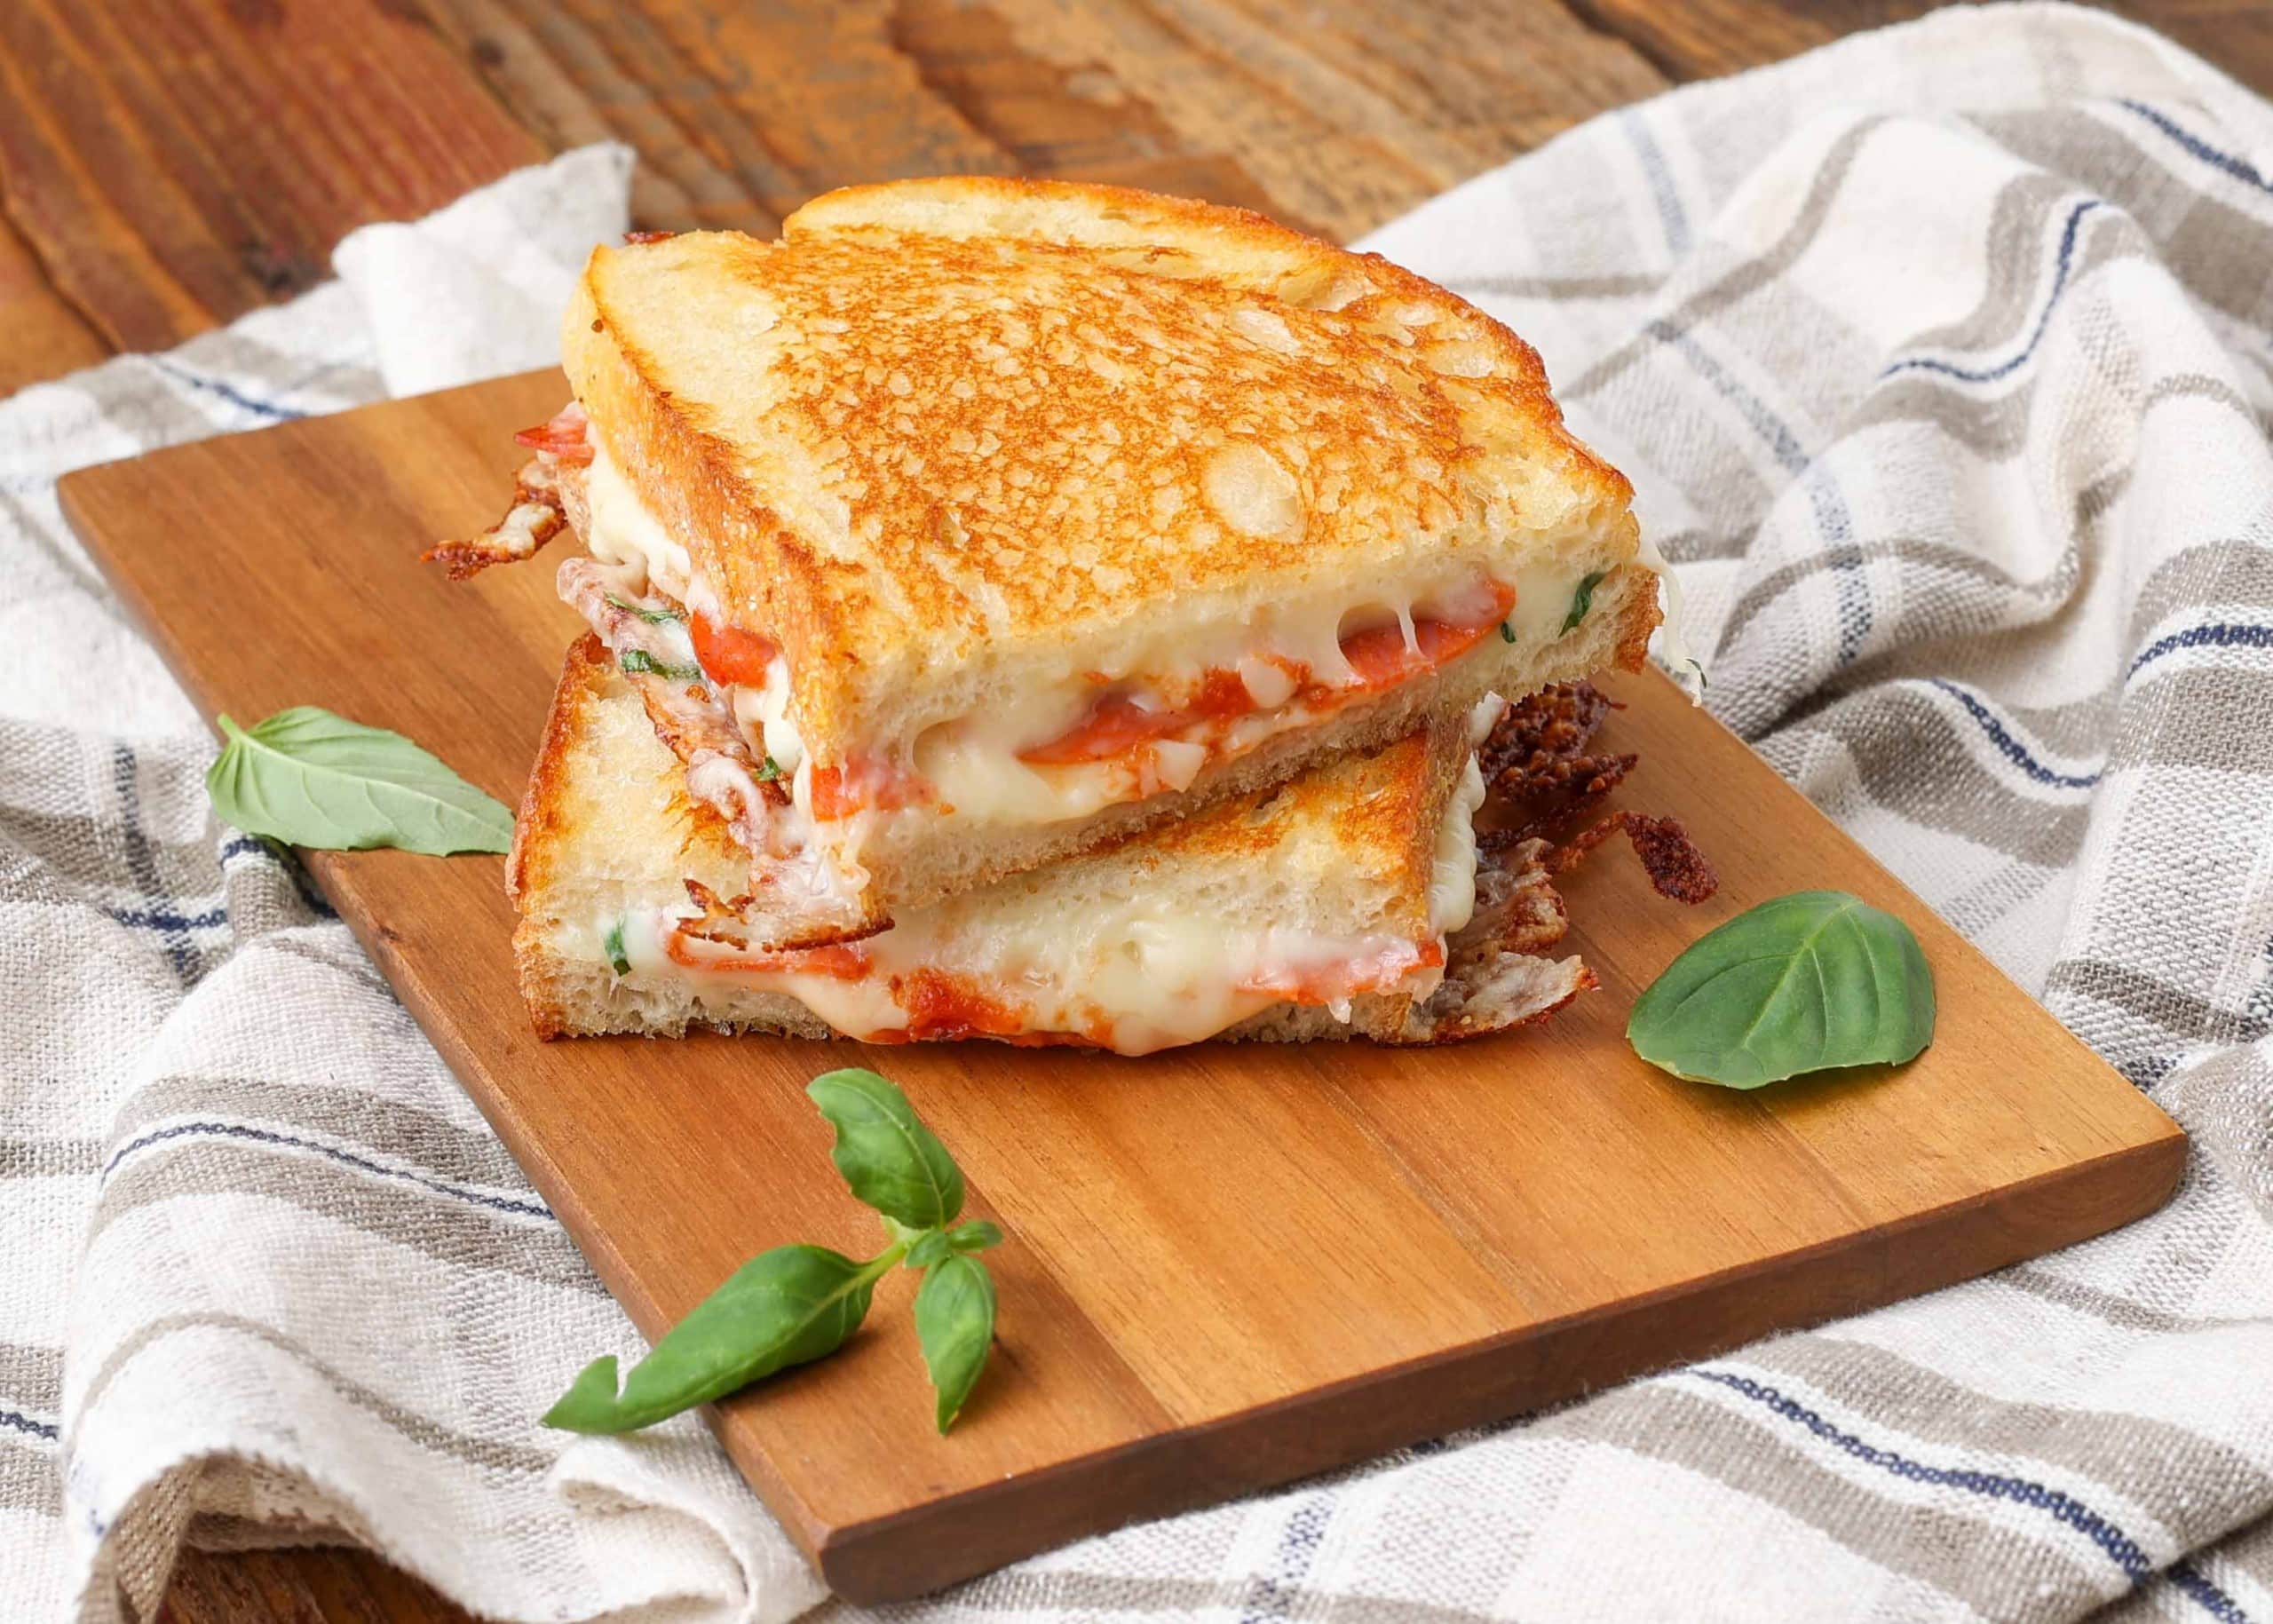 Grilled Cheese and Pepperoni Sandwich Recipe: How to Make It